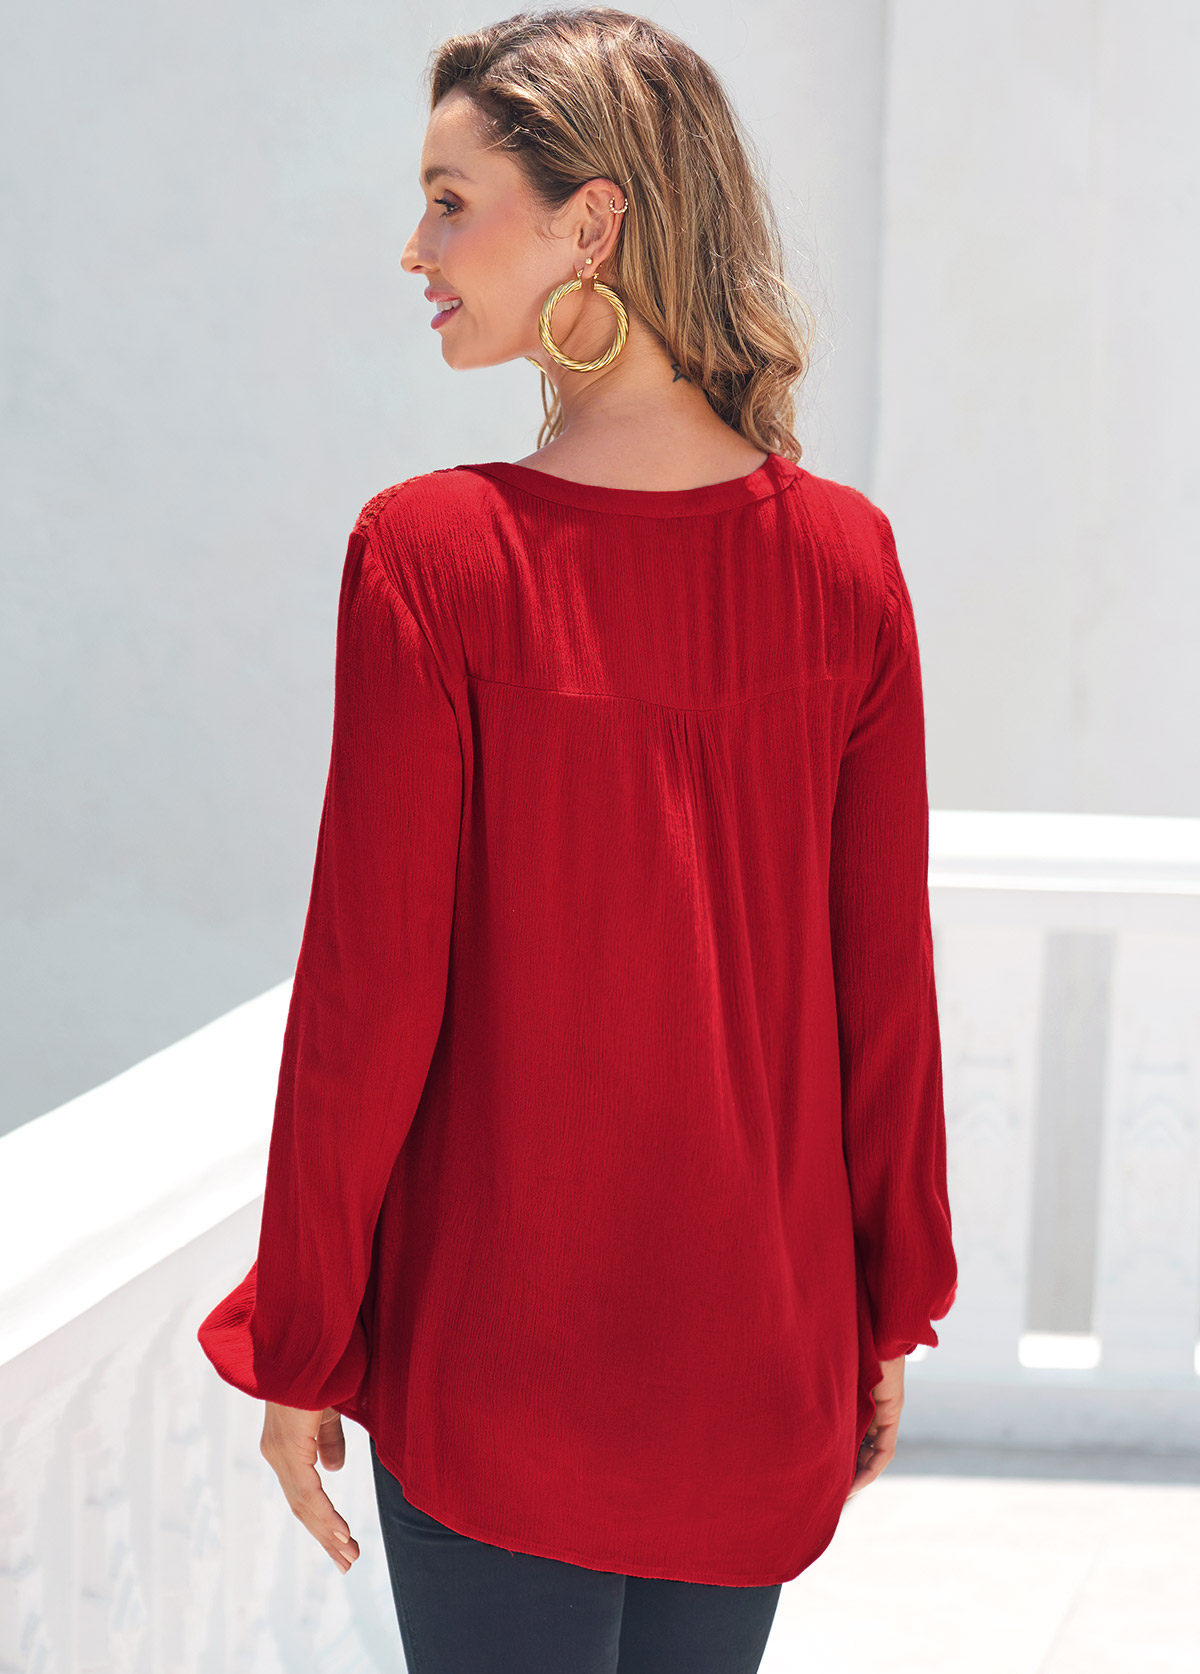 Lace Stitching Red Long Sleeve T Shirt